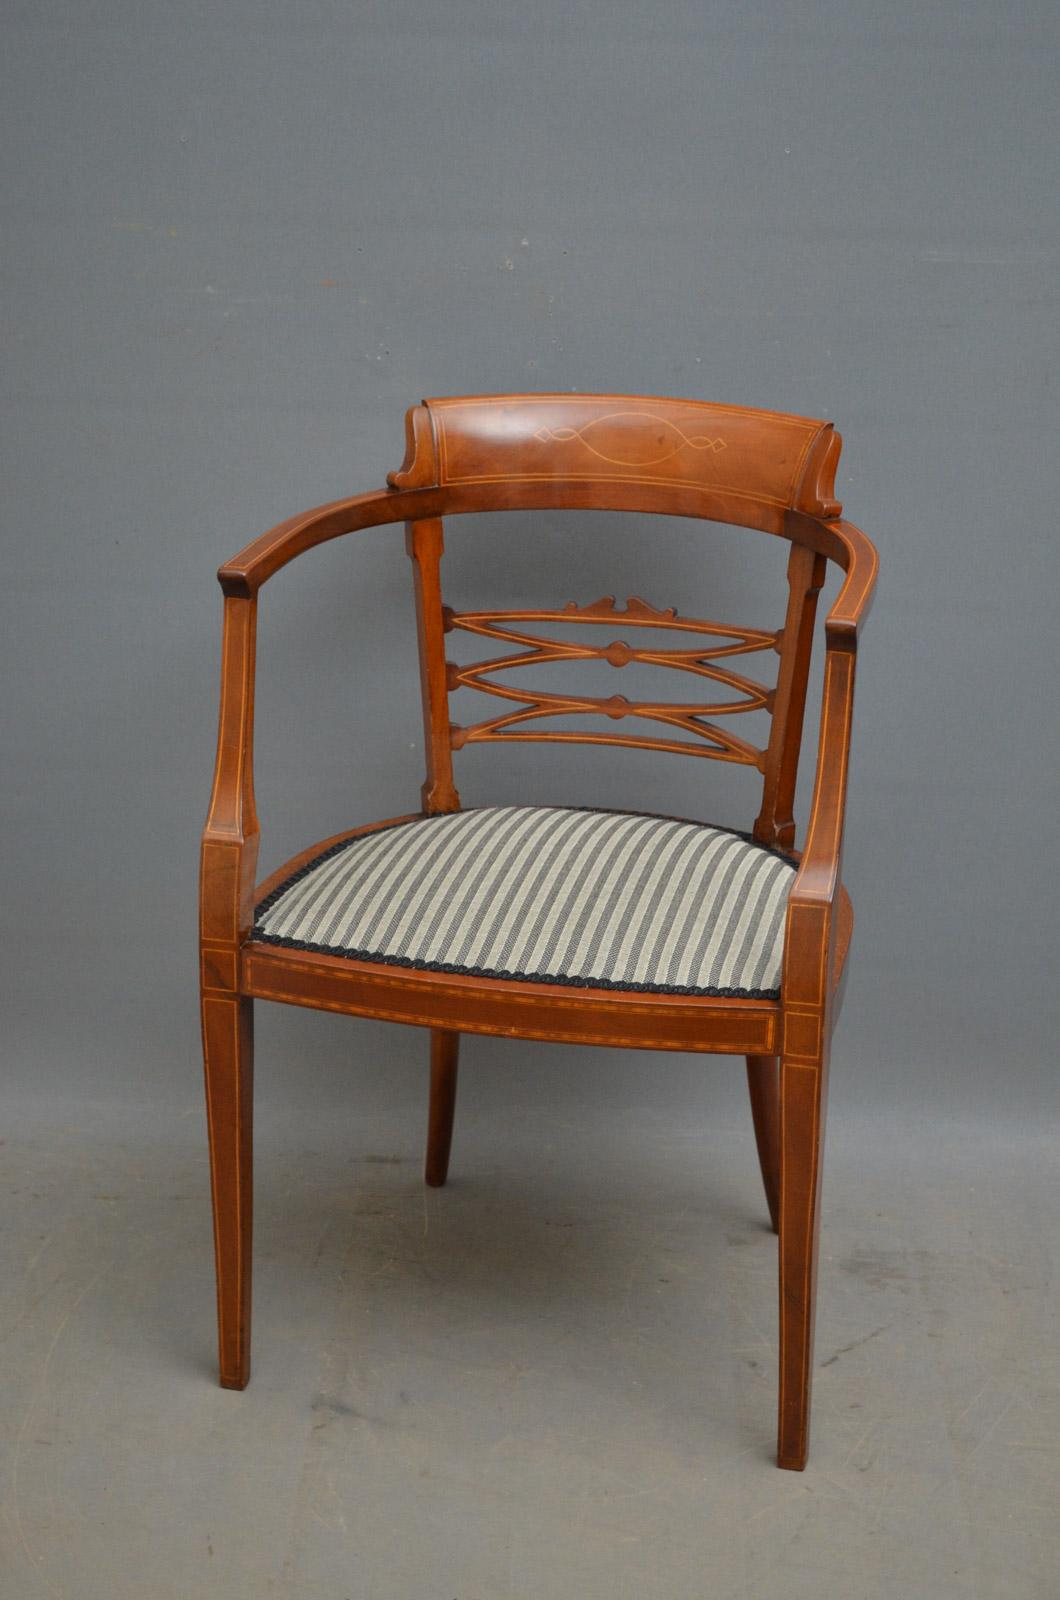 Sn4451 Edwardian inlaid elbow chair, having shaped and inlaid top rail with string inlaid arms and splats below, all standing on slender legs terminating. This antique occasional armchair retains its original color, finish and patina with newly